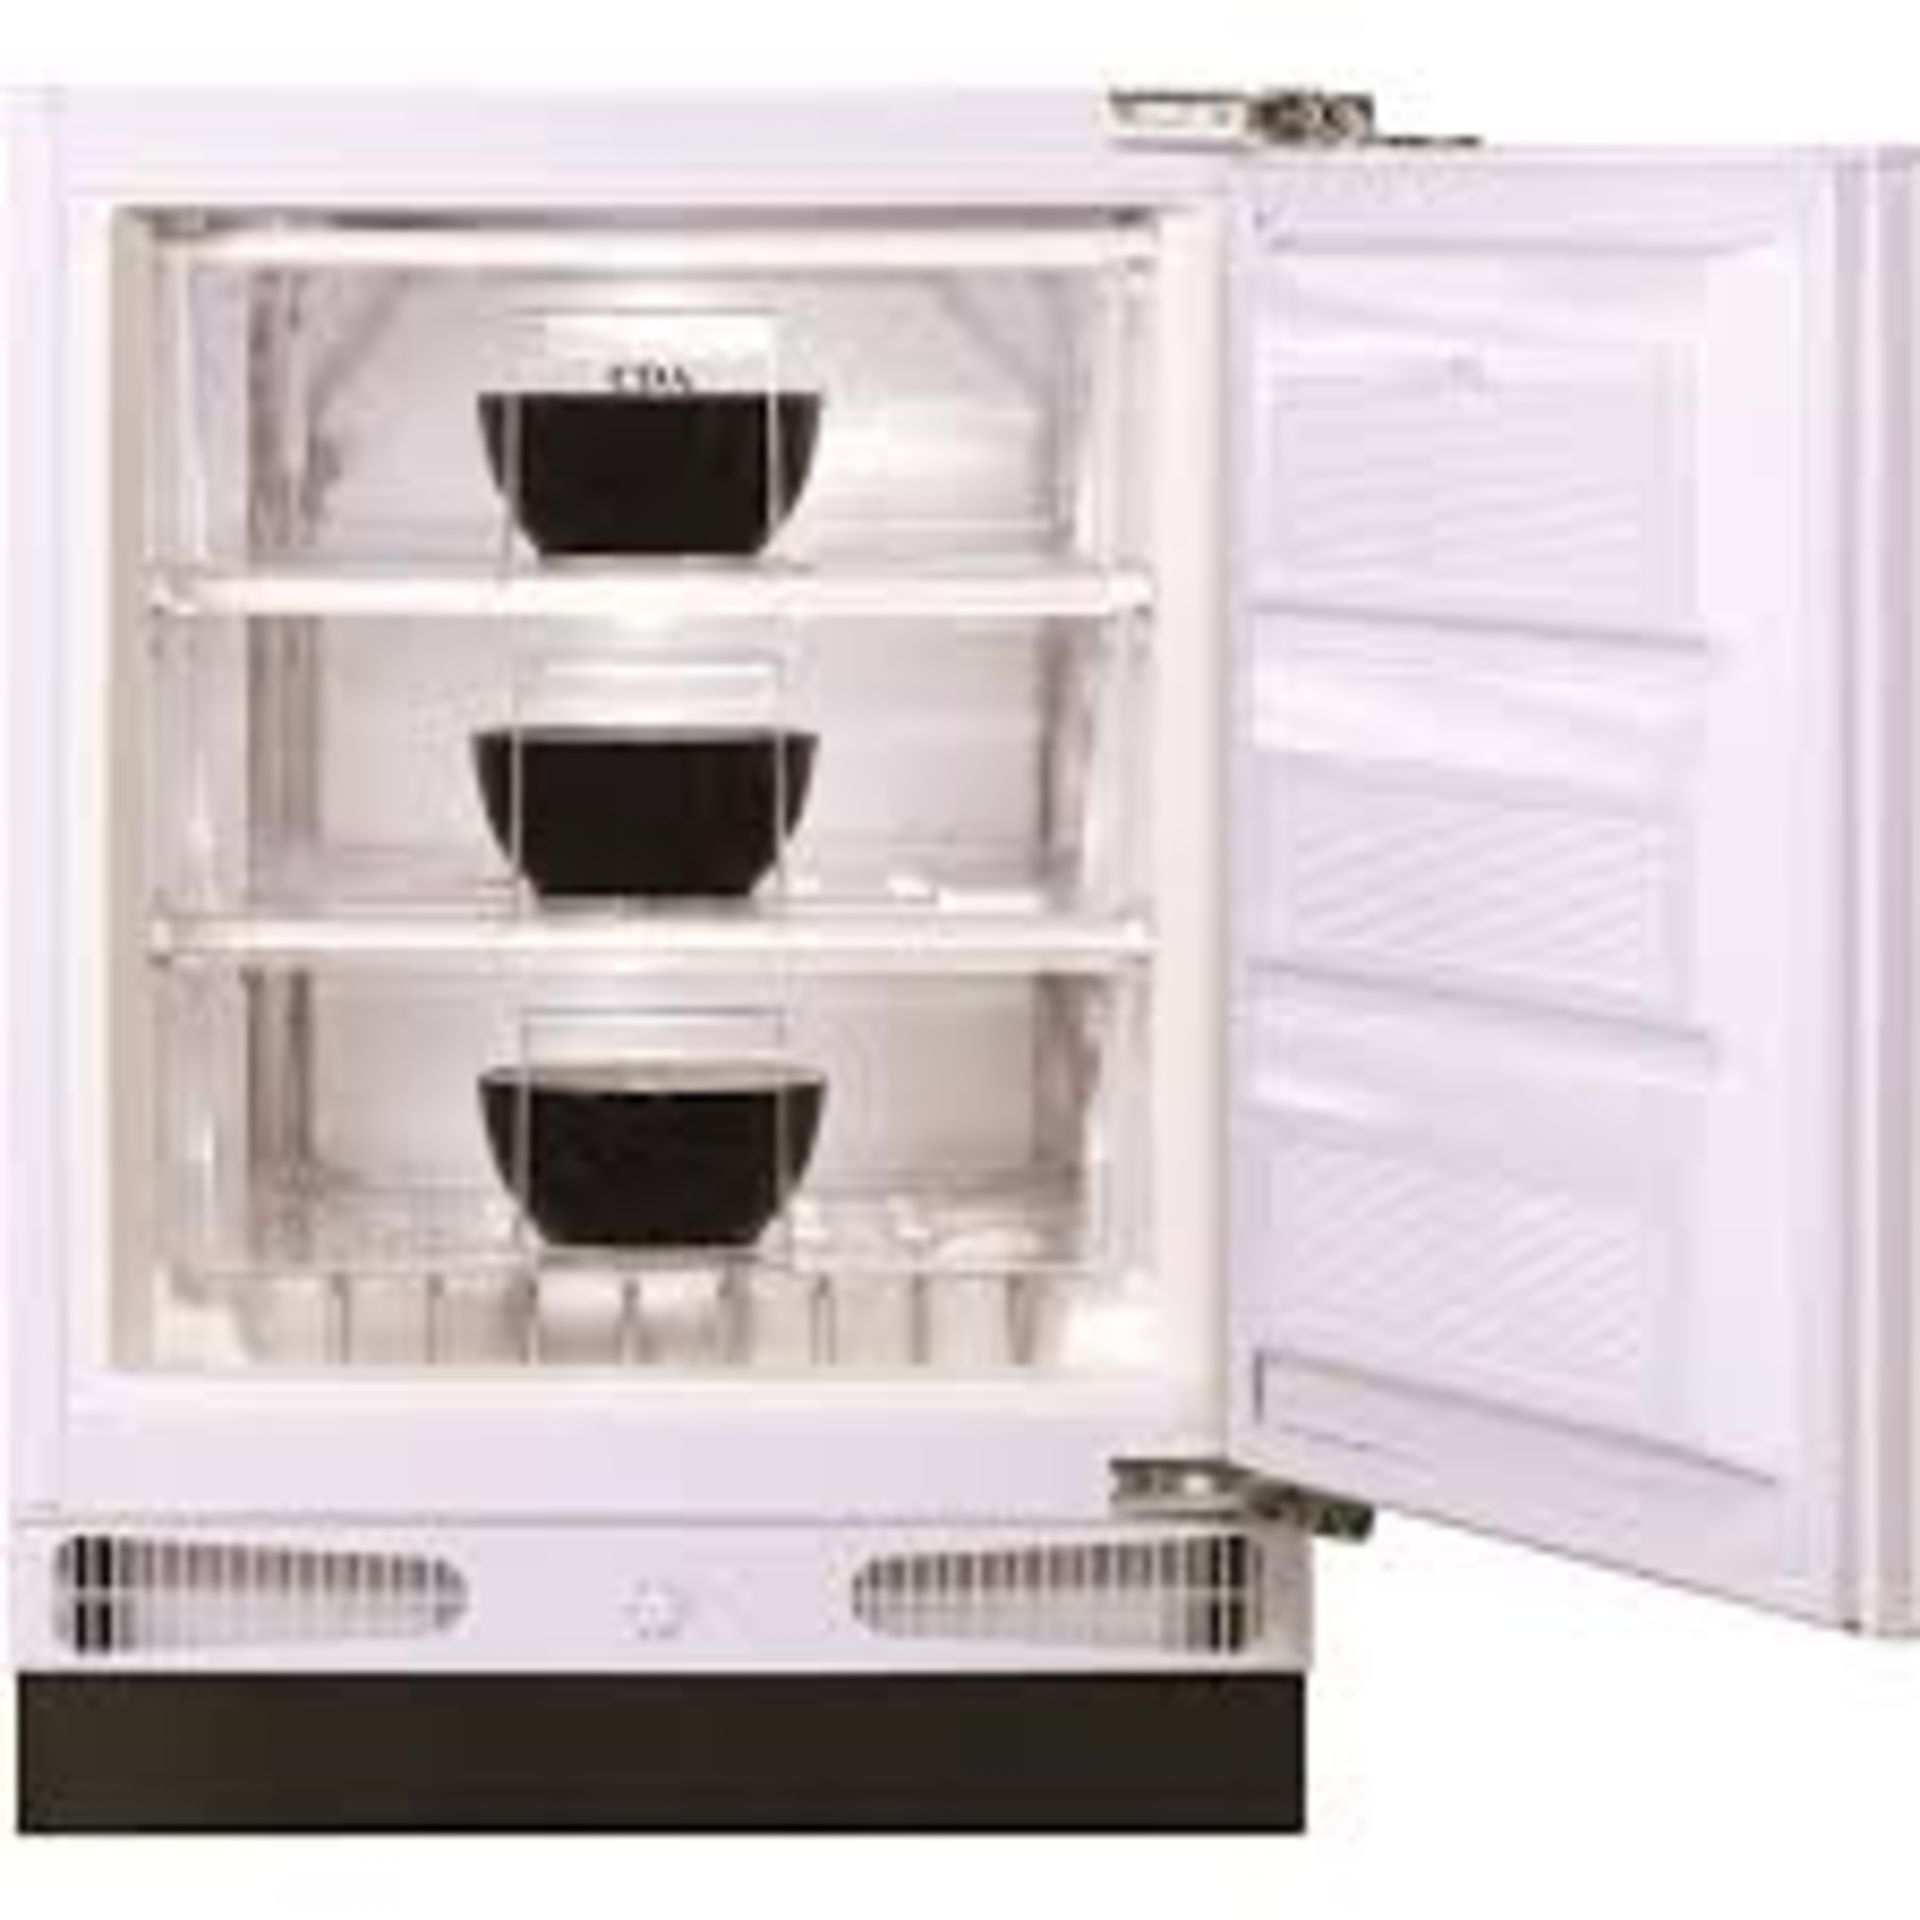 + VAT Brand New CDA FW283 Integrated Under Counter Freezer - A+ Energy Rating - 93L Capacity -